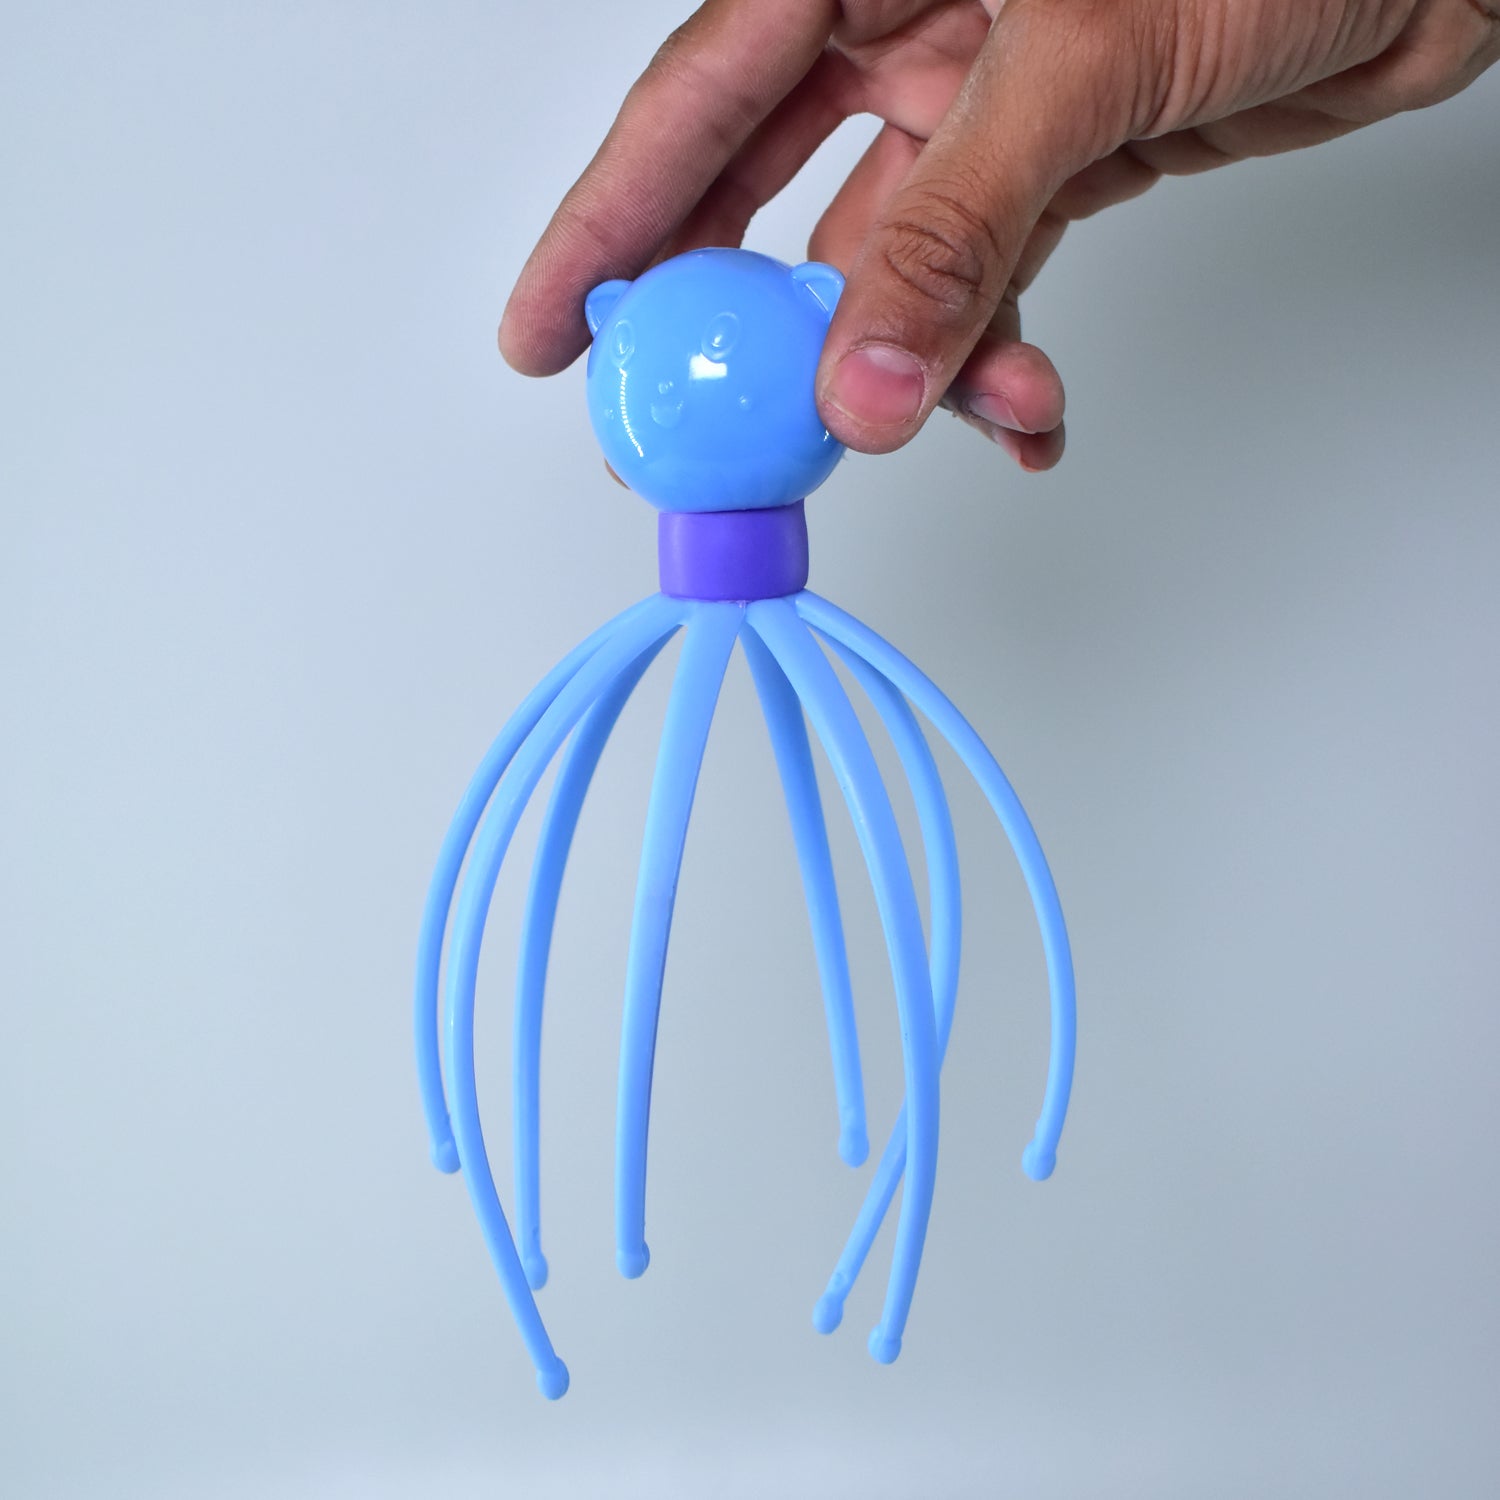 6098 A Octopus Head Massager Used While Massaging Hair Scalps And Head.